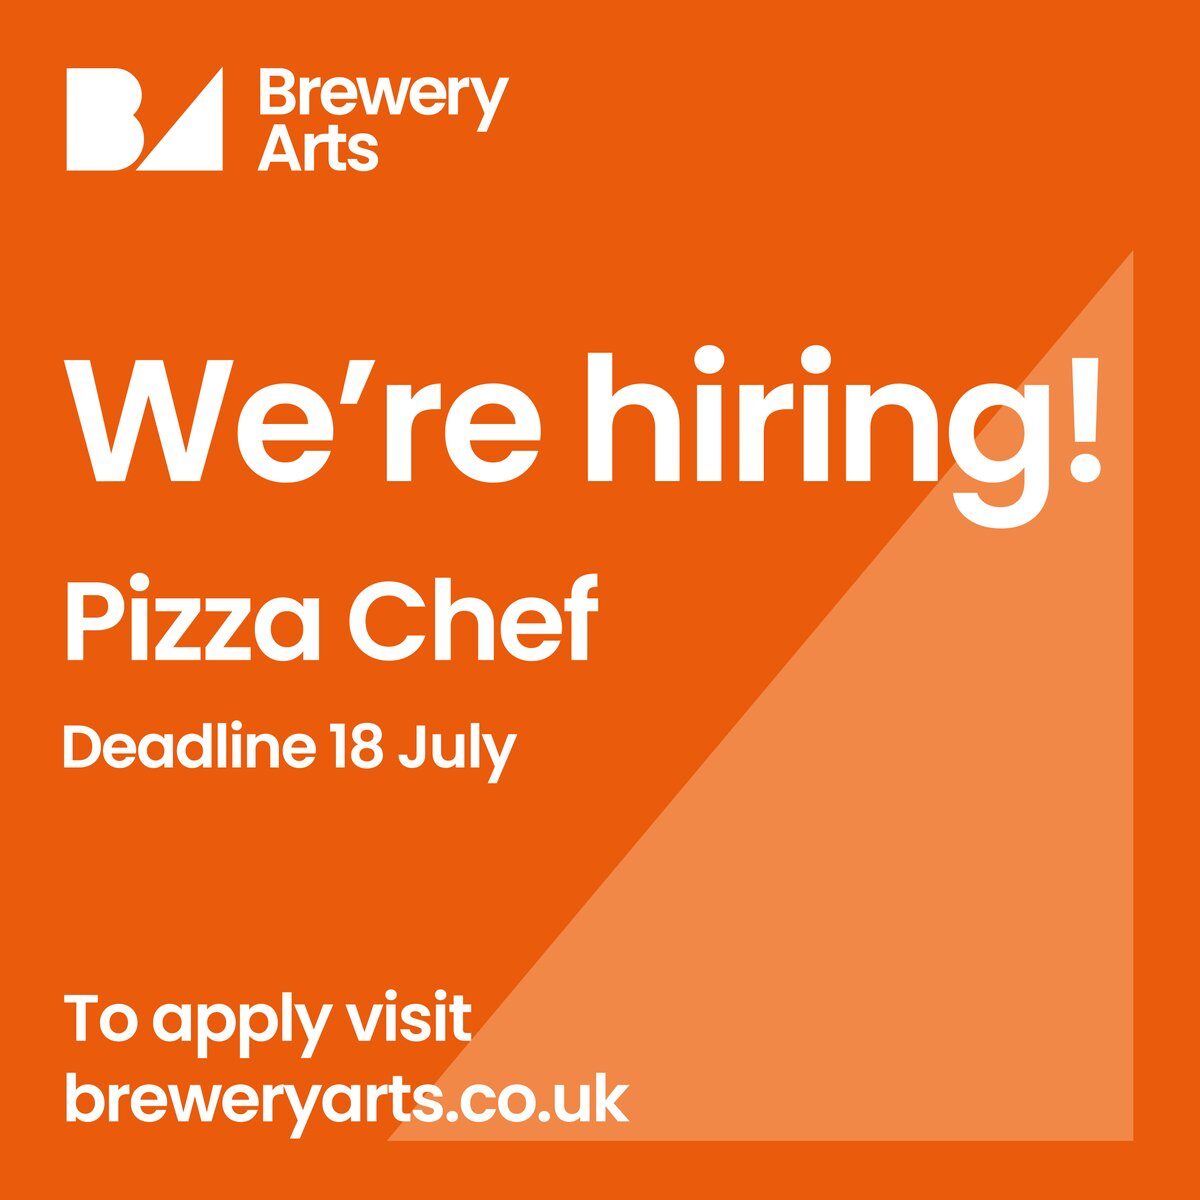 Recruiting! A Pizza Chef to join our fa...